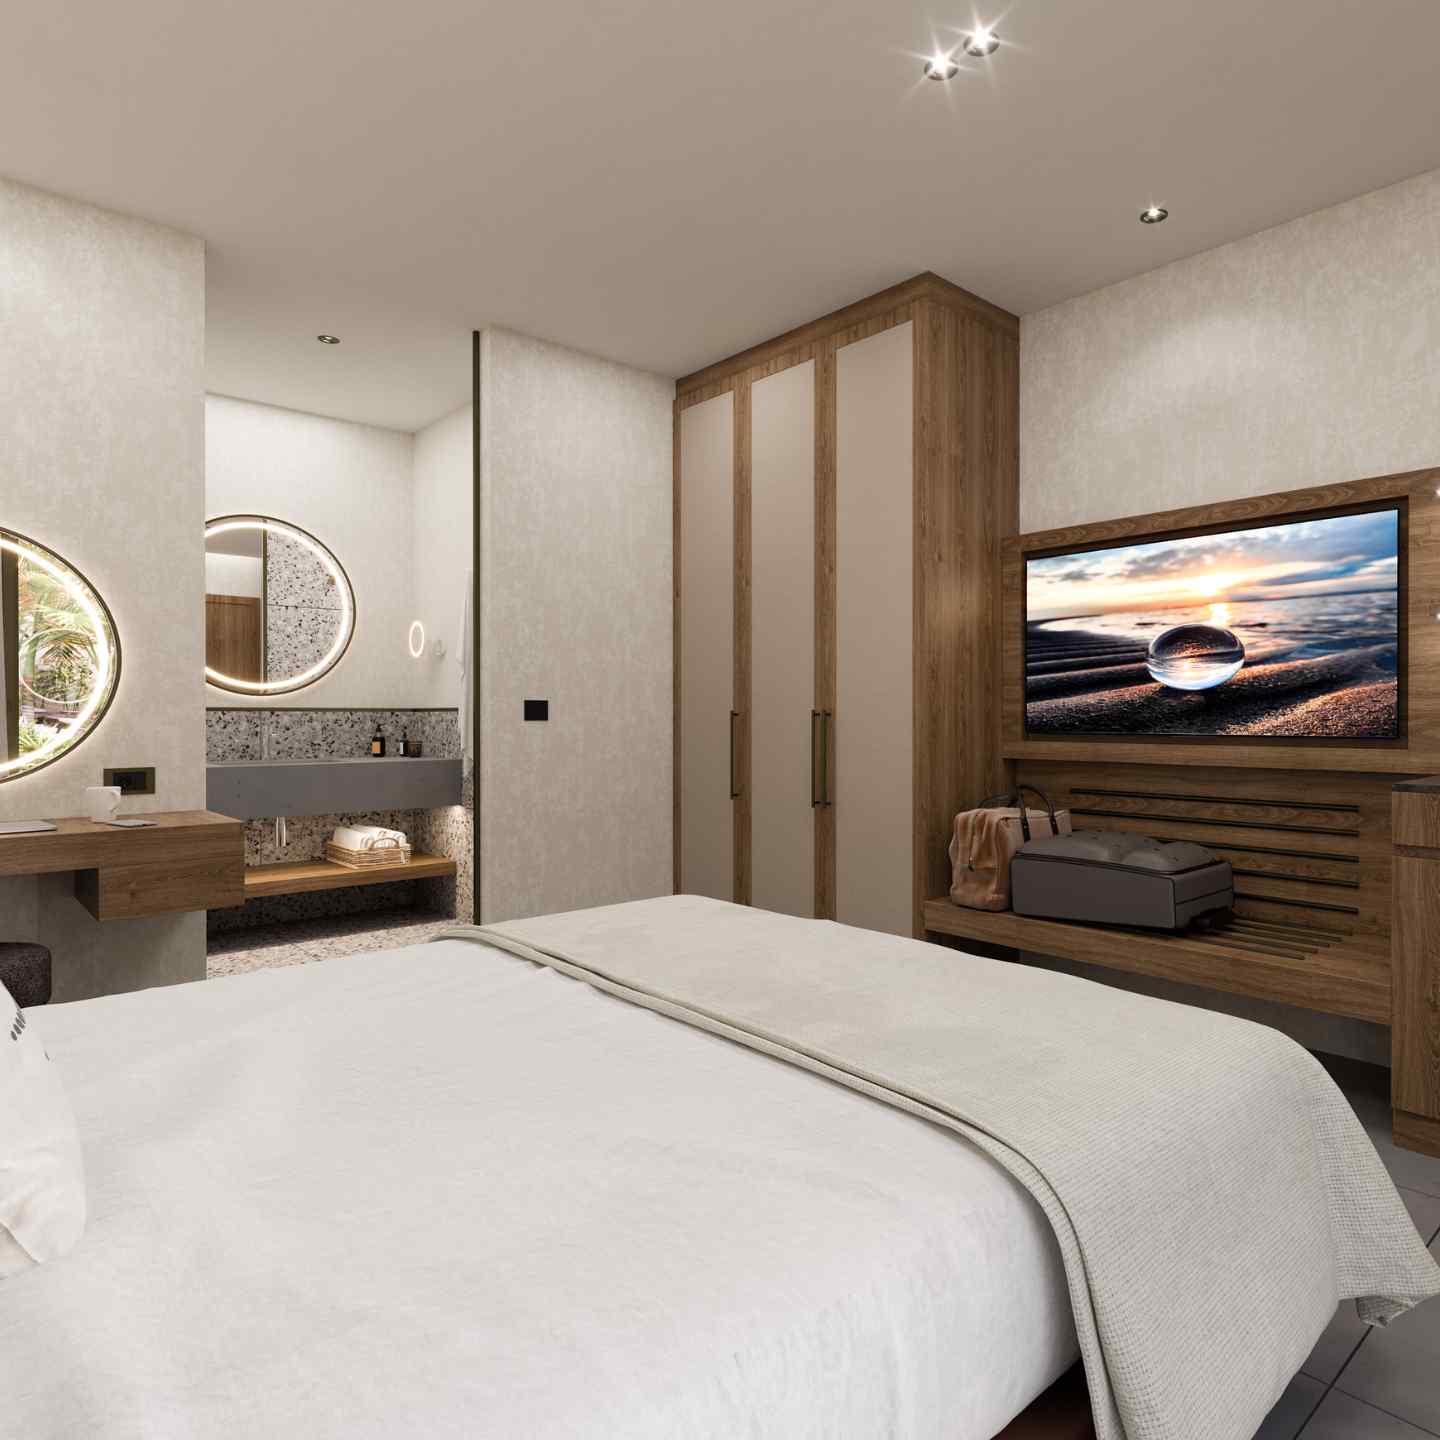 Corner of bed facing a wall with wooden console and wide screen tv, wardrobe in the background, and circular mirrors on wall